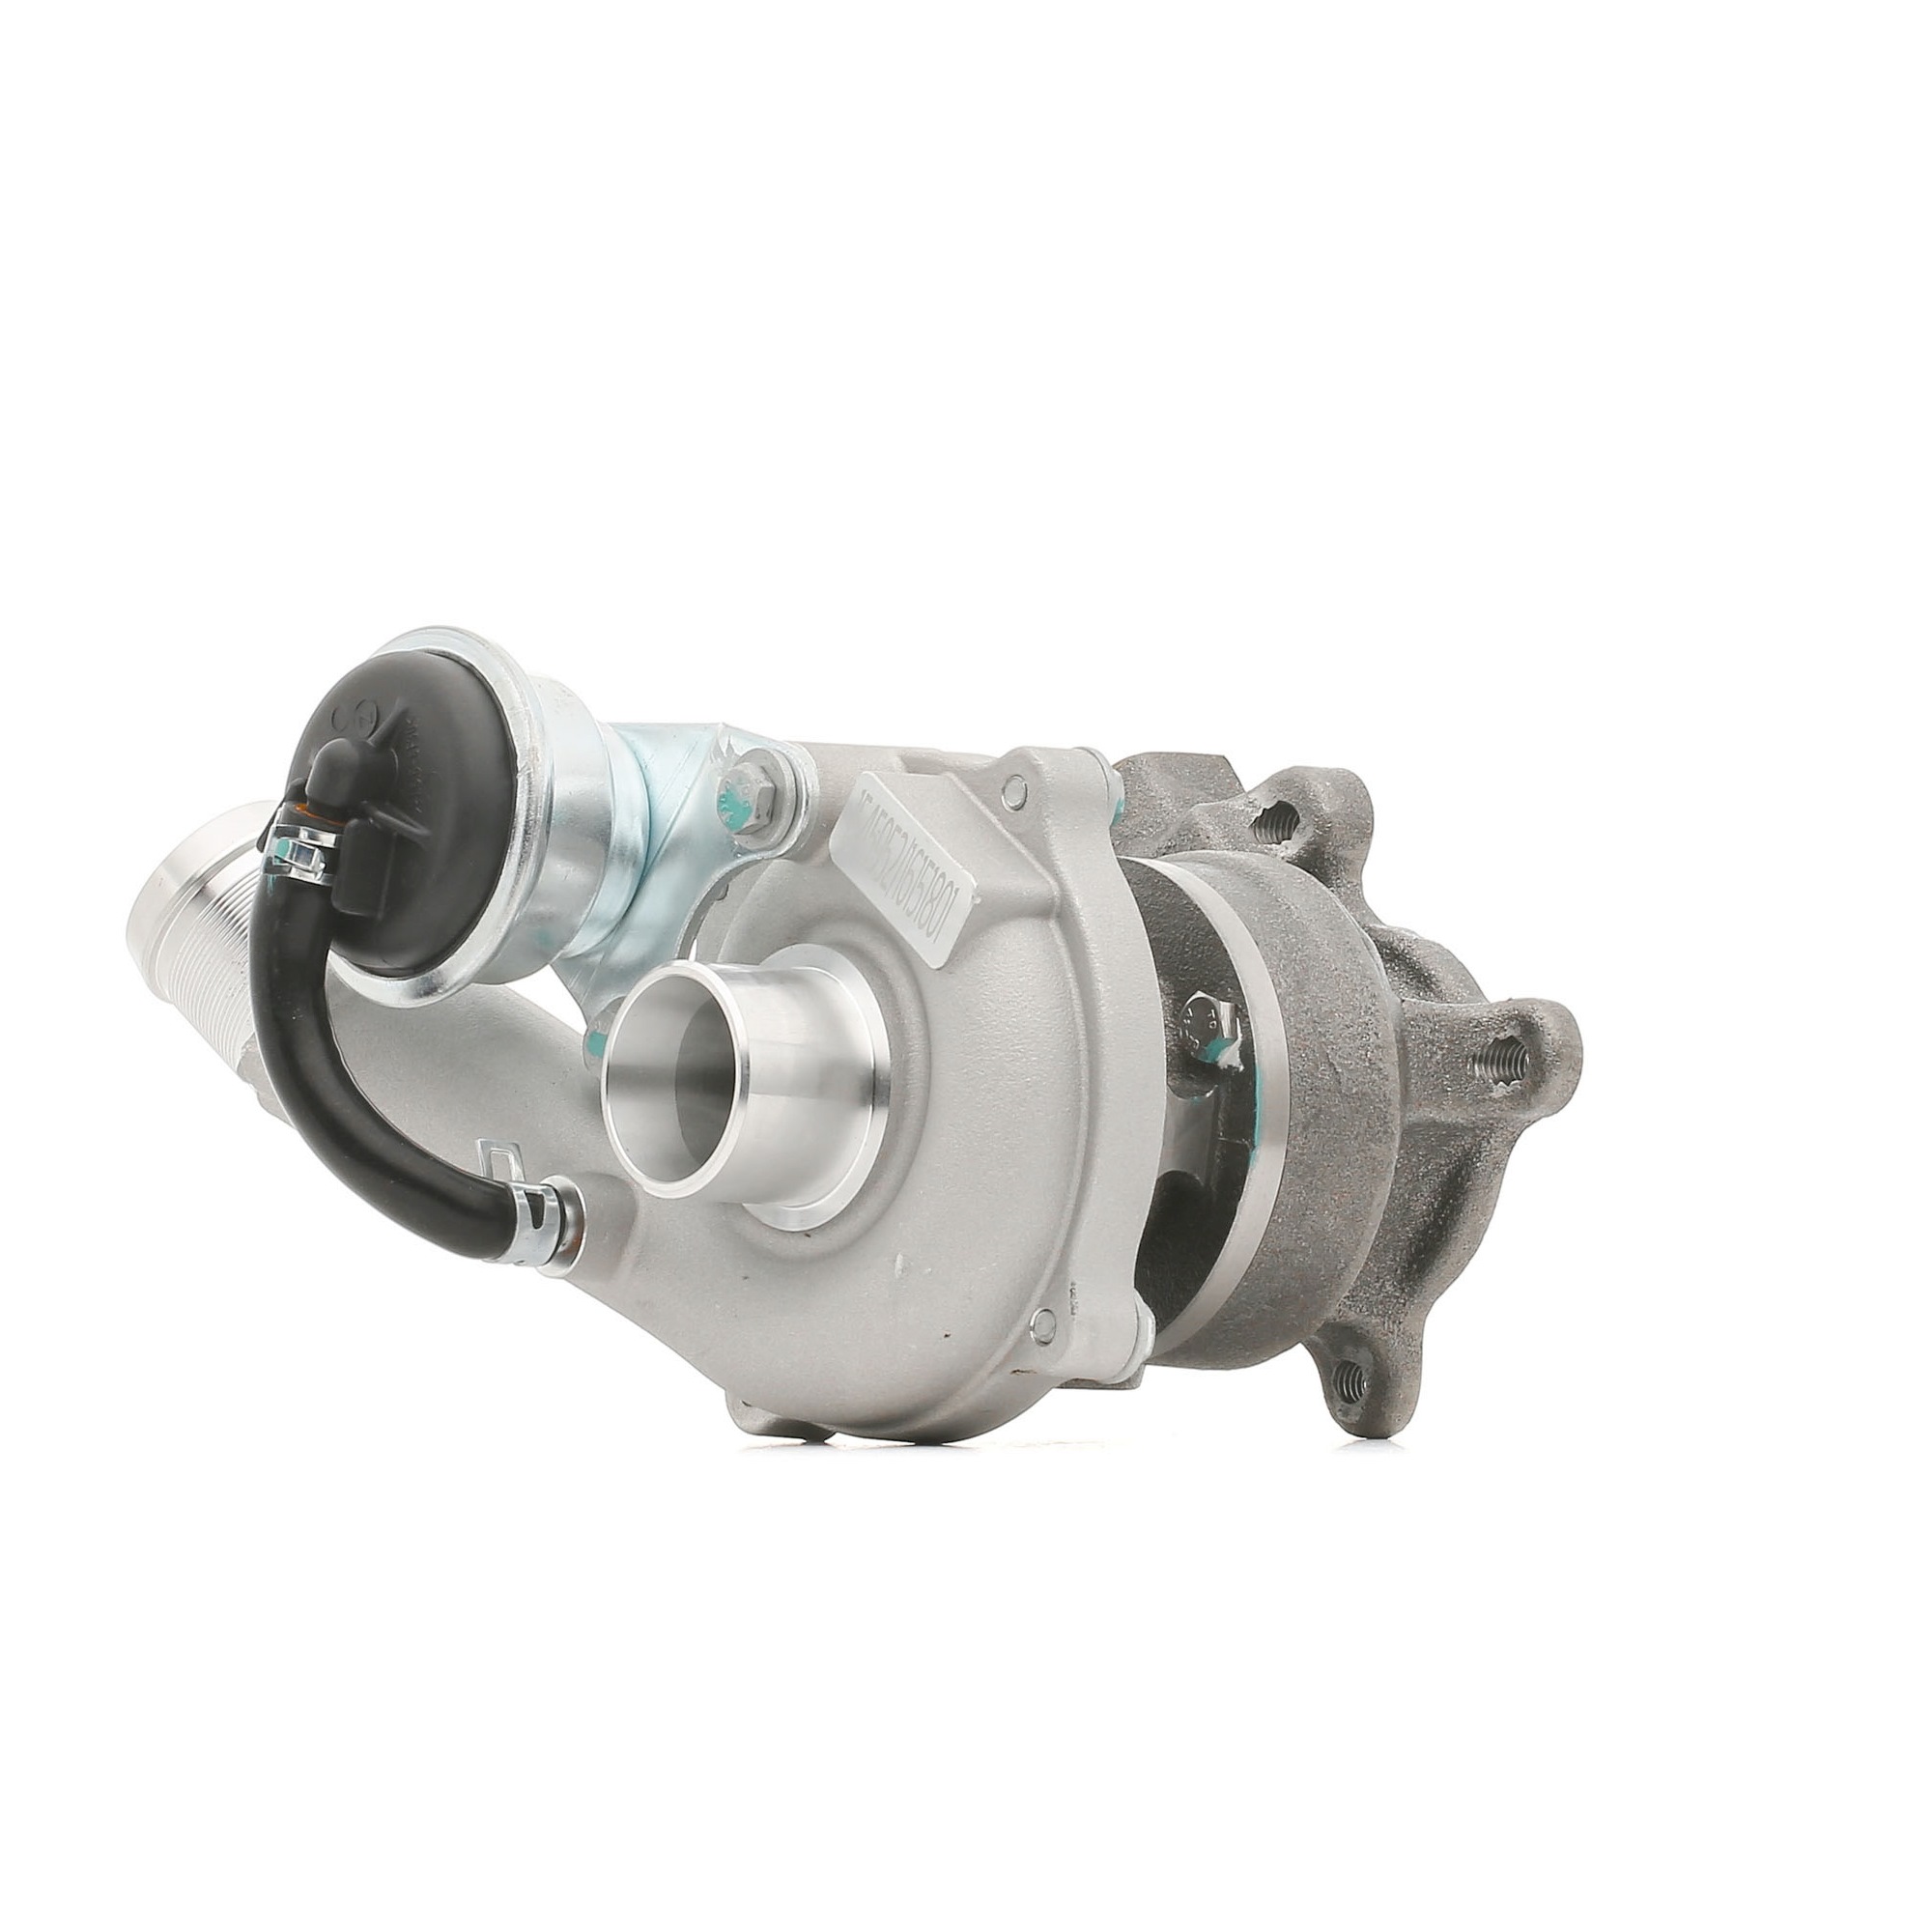 RIDEX 2234C10409 Turbocharger Exhaust Turbocharger, with gaskets/seals